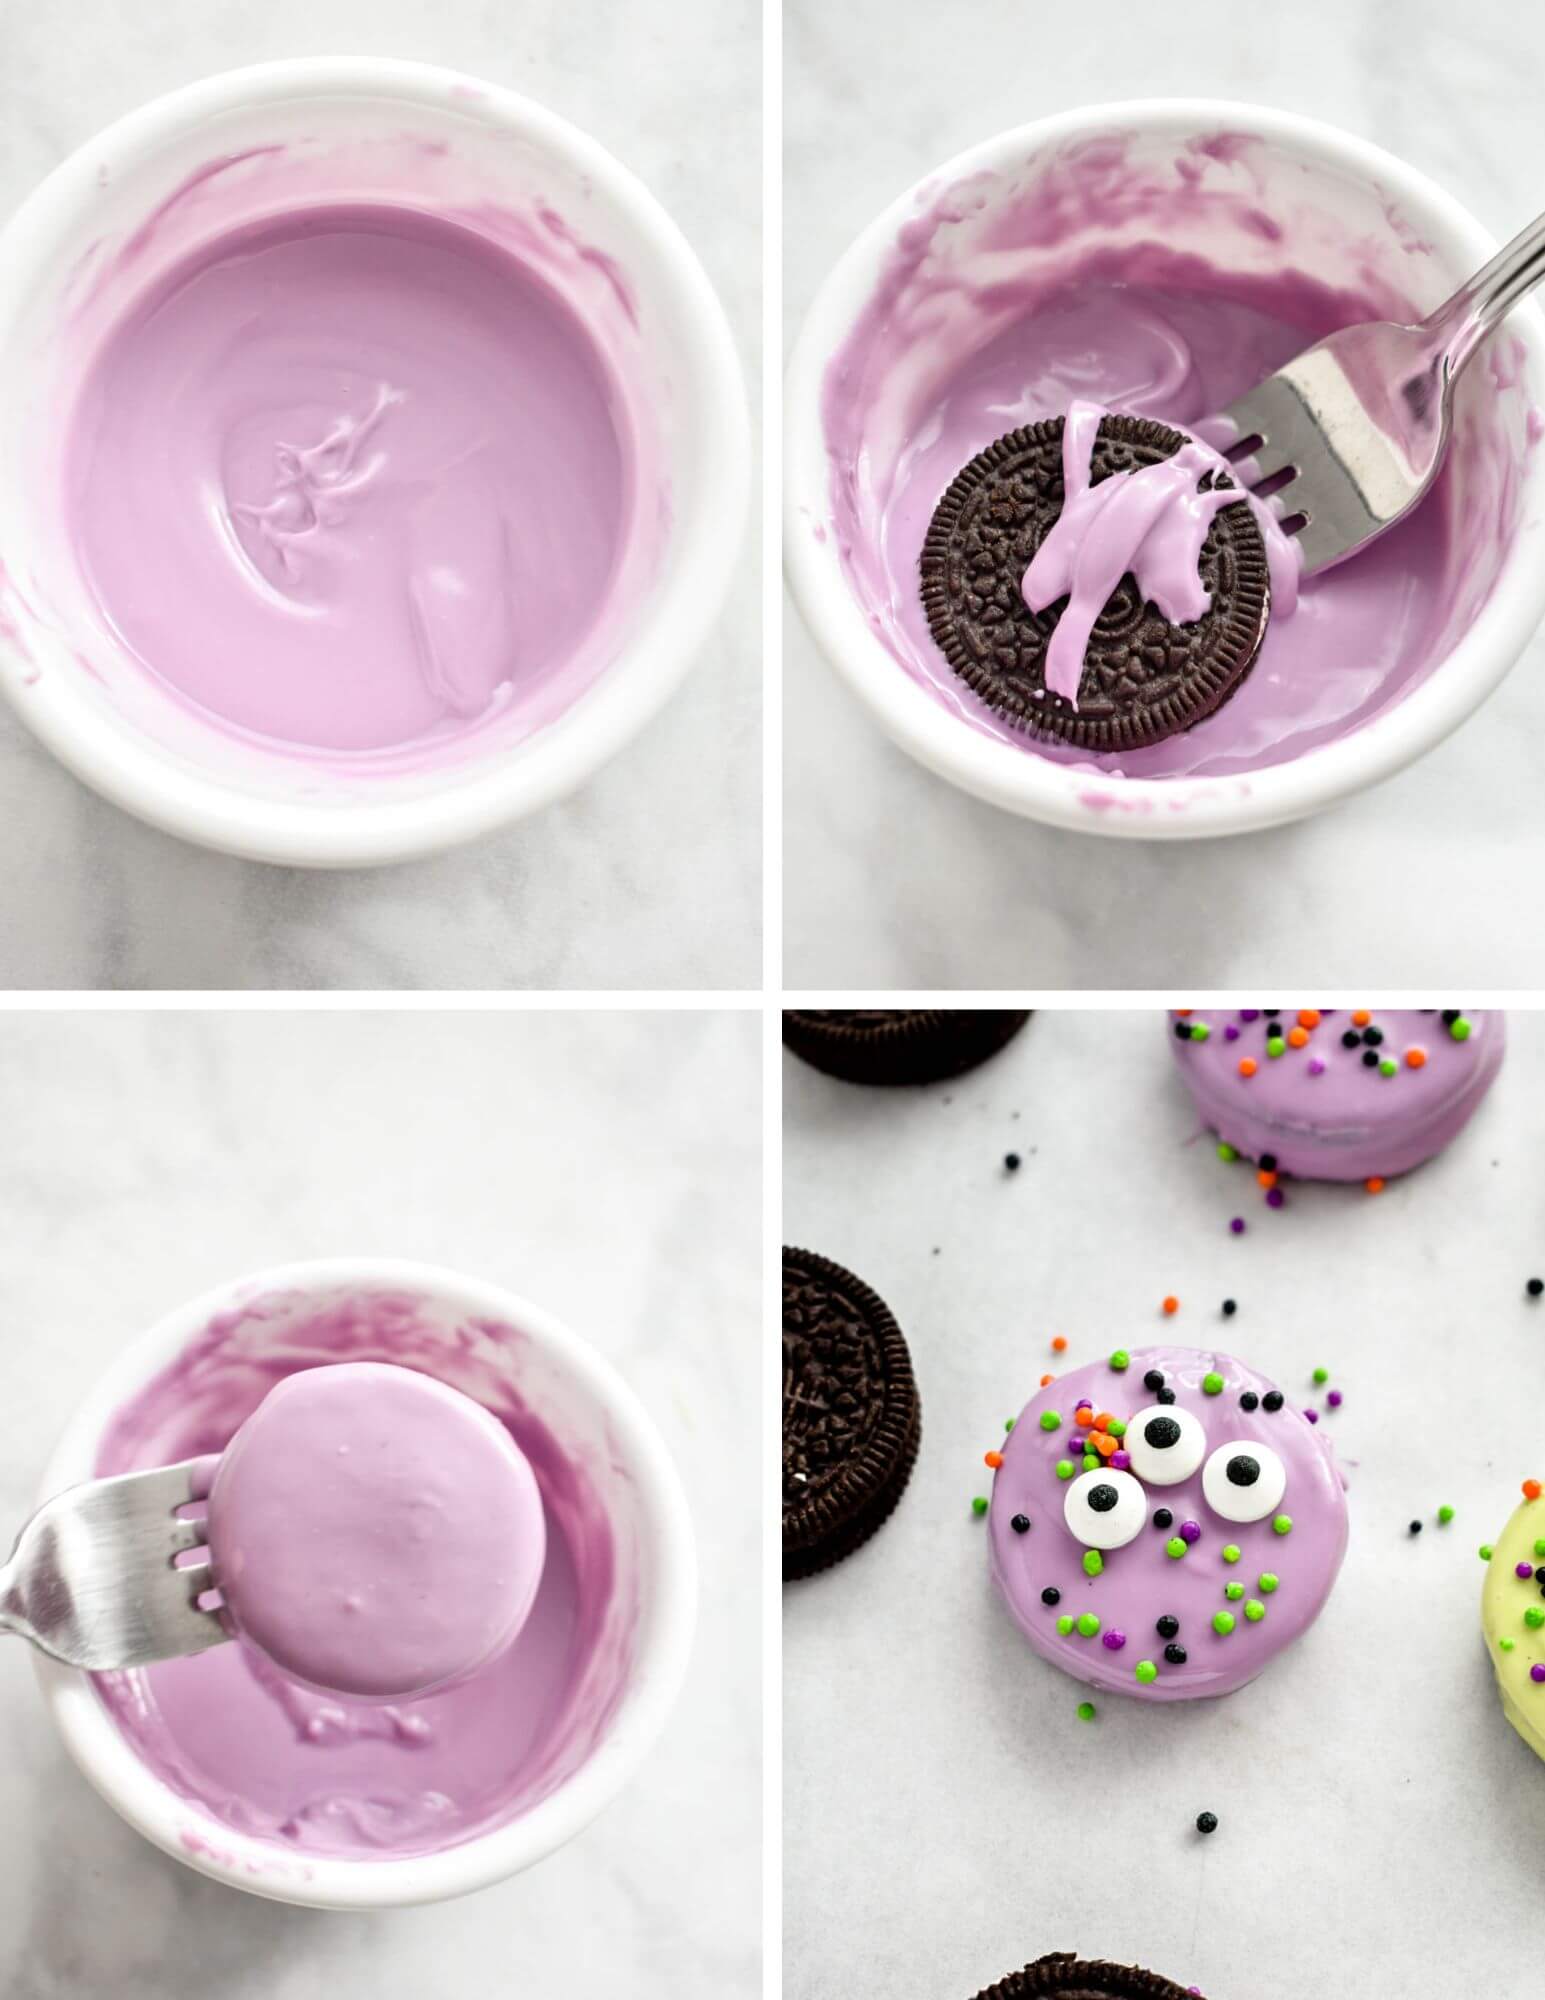 Photo collage showing the steps for making purple monster oreo cookies.